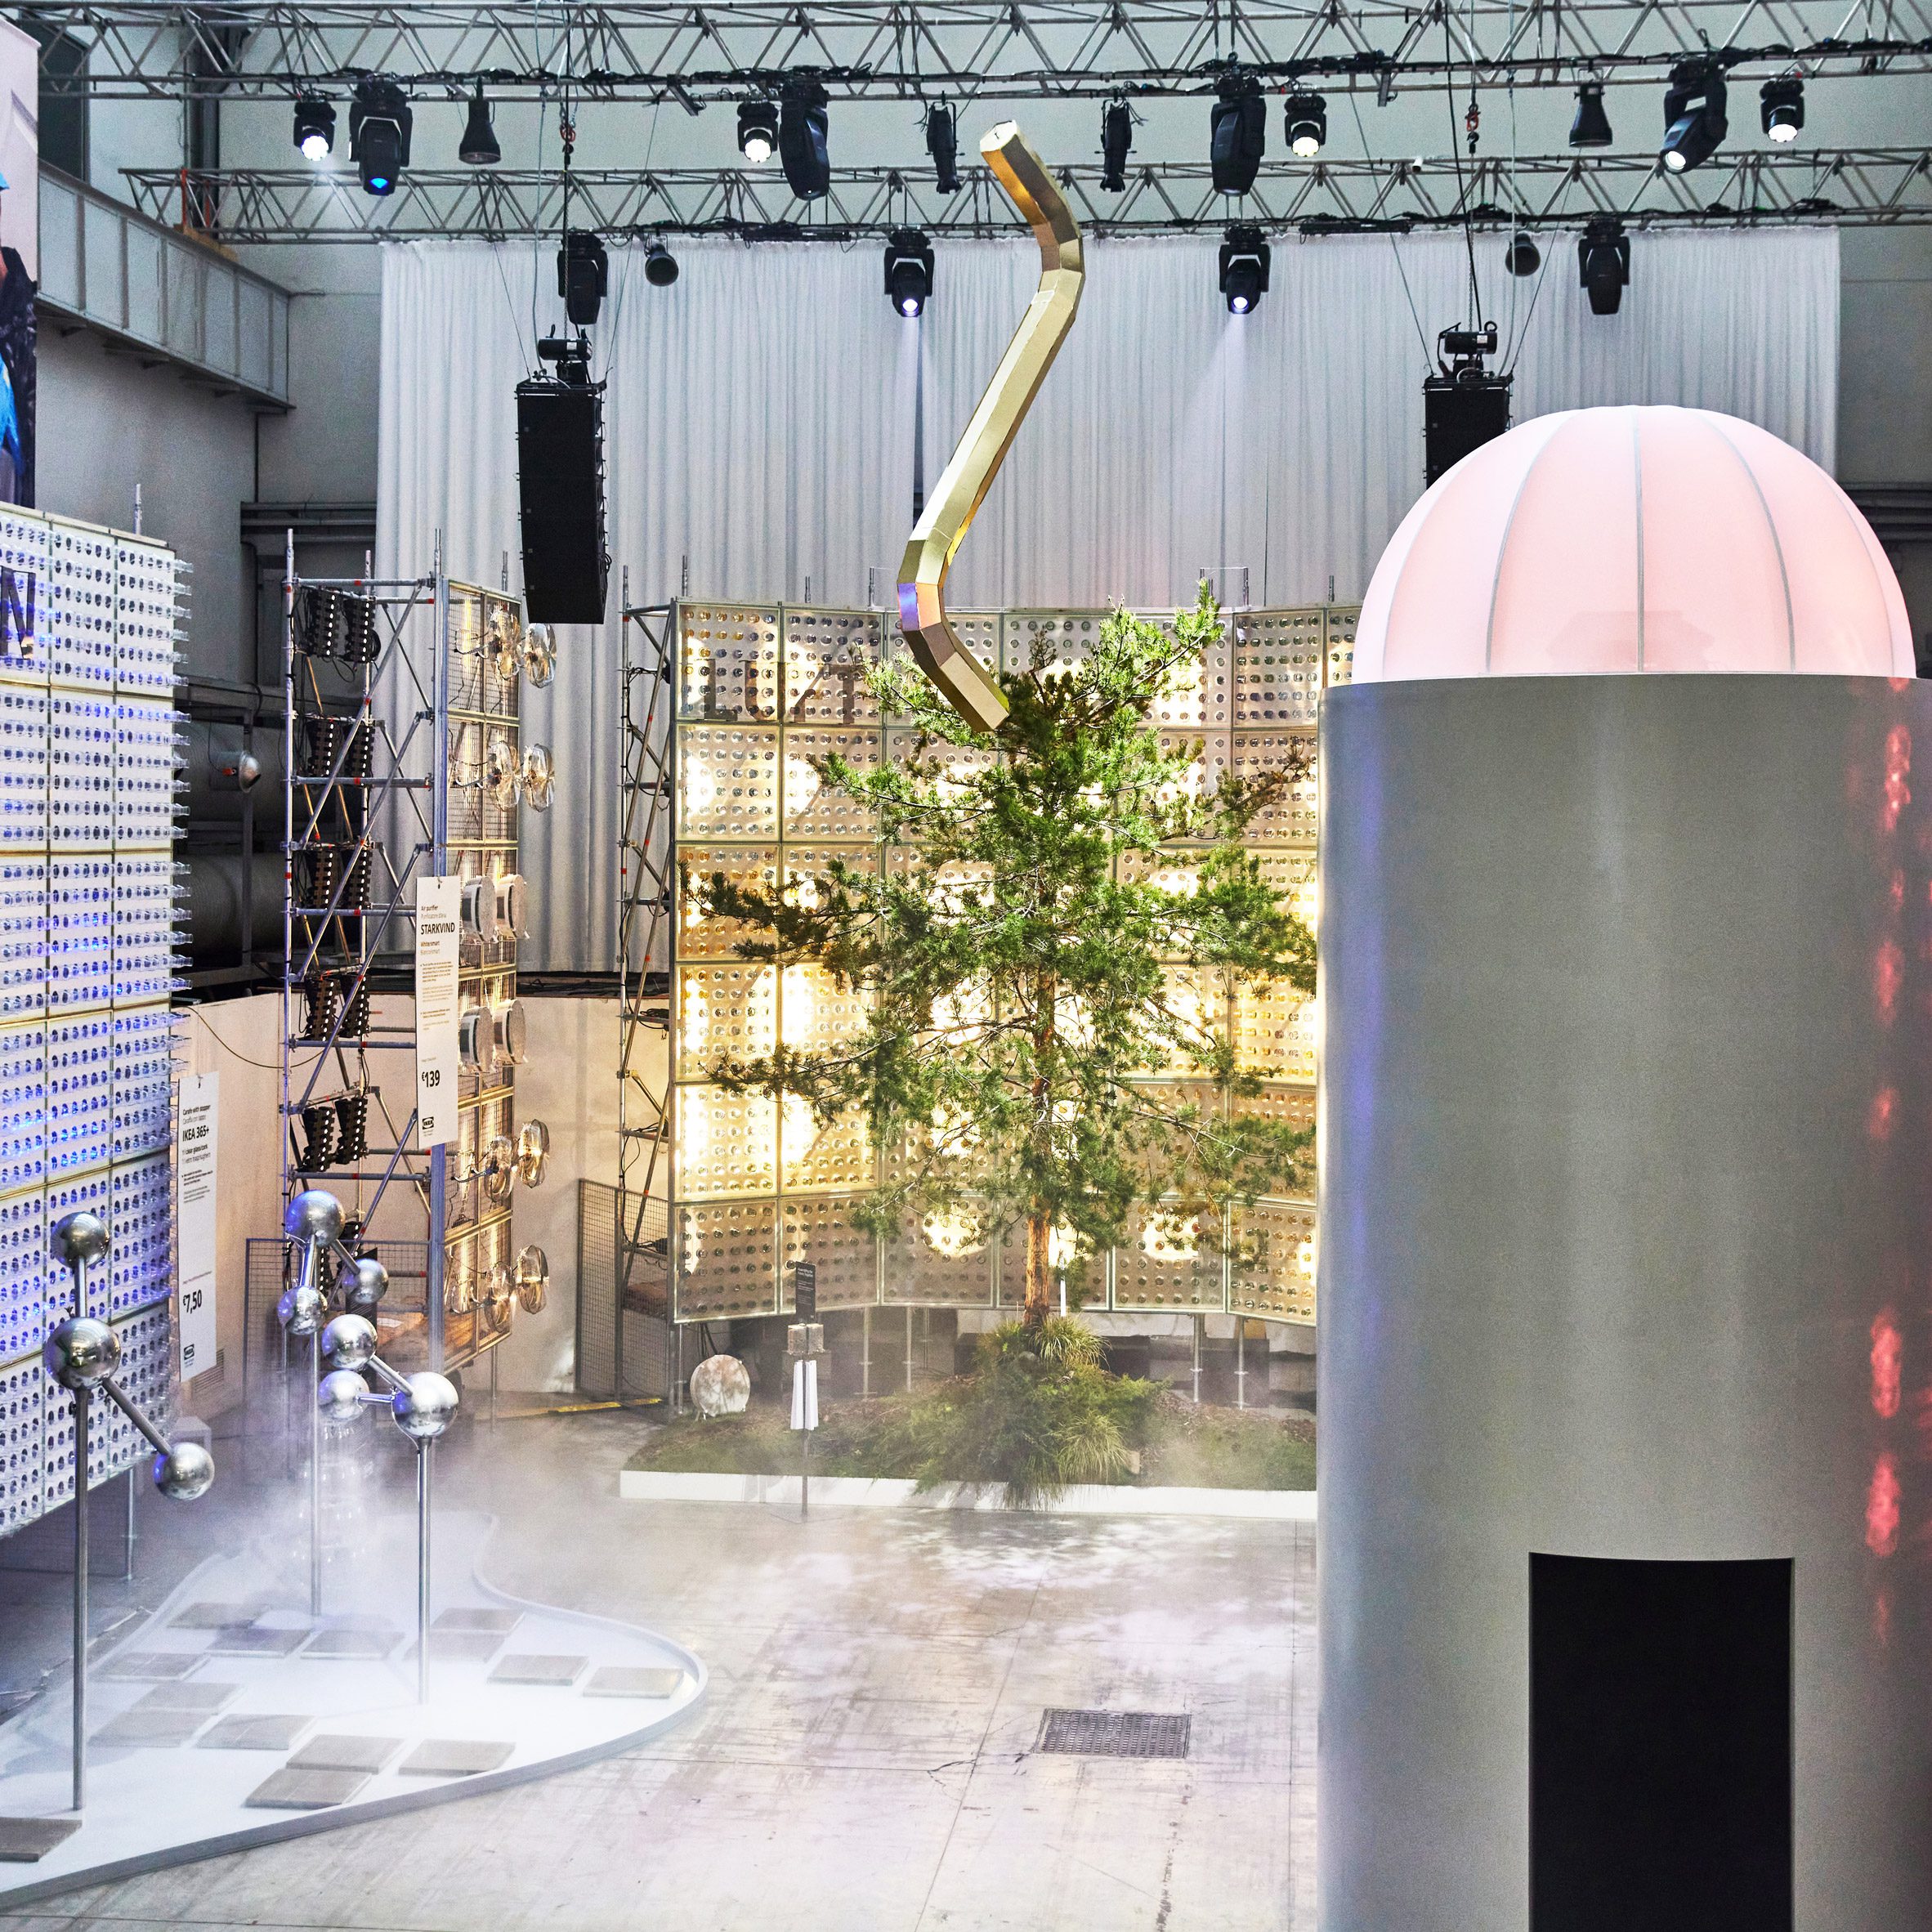 IKEA Festival at Milan design week to explore life at home and beyond